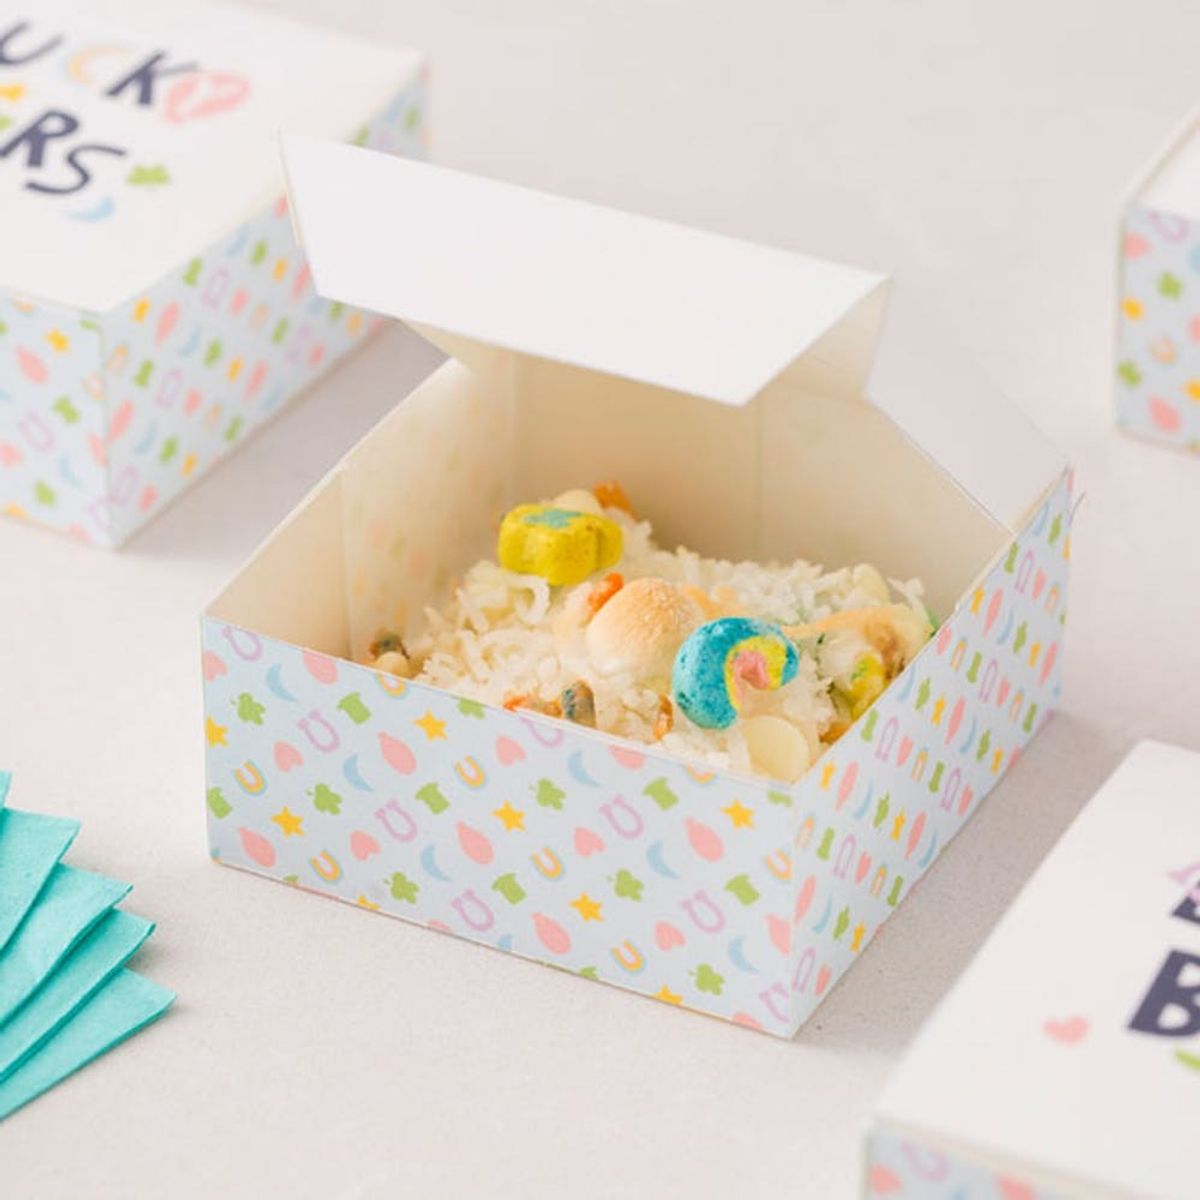 These Lucky Charms Bars Are the Perfect Treat for St. Paddy’s Day